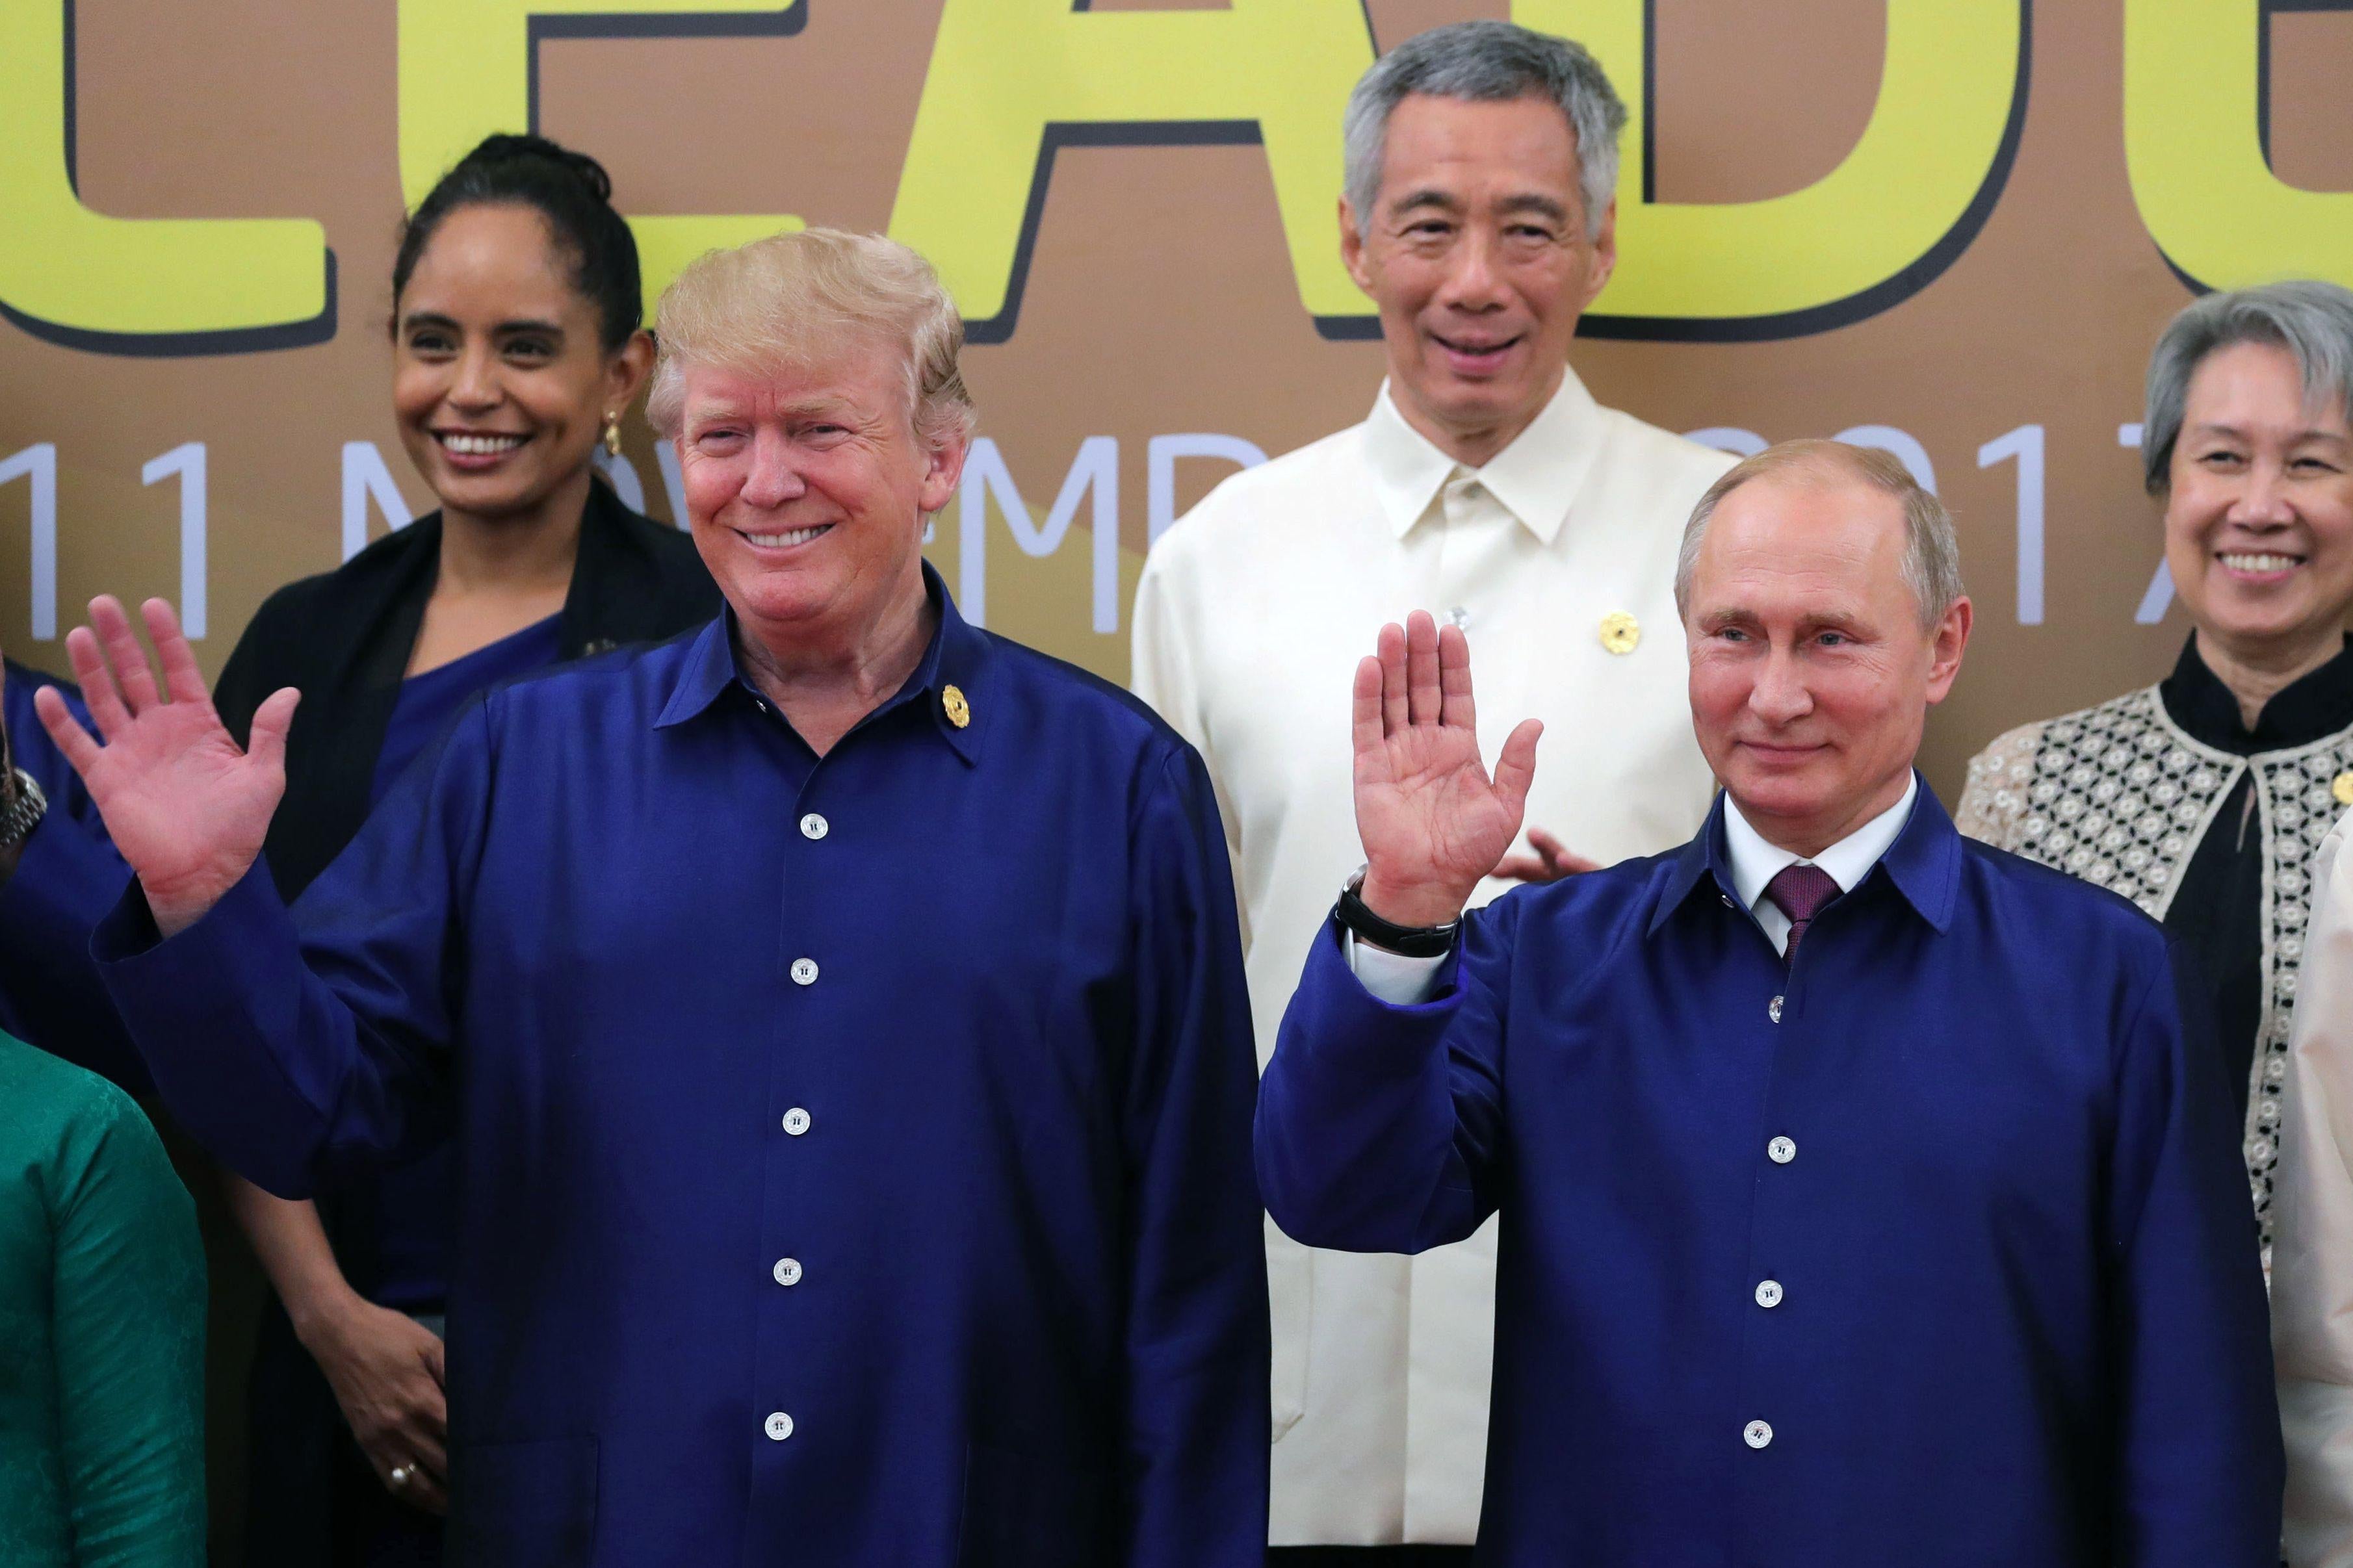 US President Donald Trump (L) and Russia's President Vladimir Putin (R) wave as they pose for a group photo ahead of the Asia-Pacific Economic Cooperation (APEC) Summit leaders gala dinner in the central Vietnamese city of Danang on November 10, 2017. / AFP PHOTO / SPUTNIK / Mikhail KLIMENTYEV        (Photo credit should read MIKHAIL KLIMENTYEV/AFP/Getty Images)